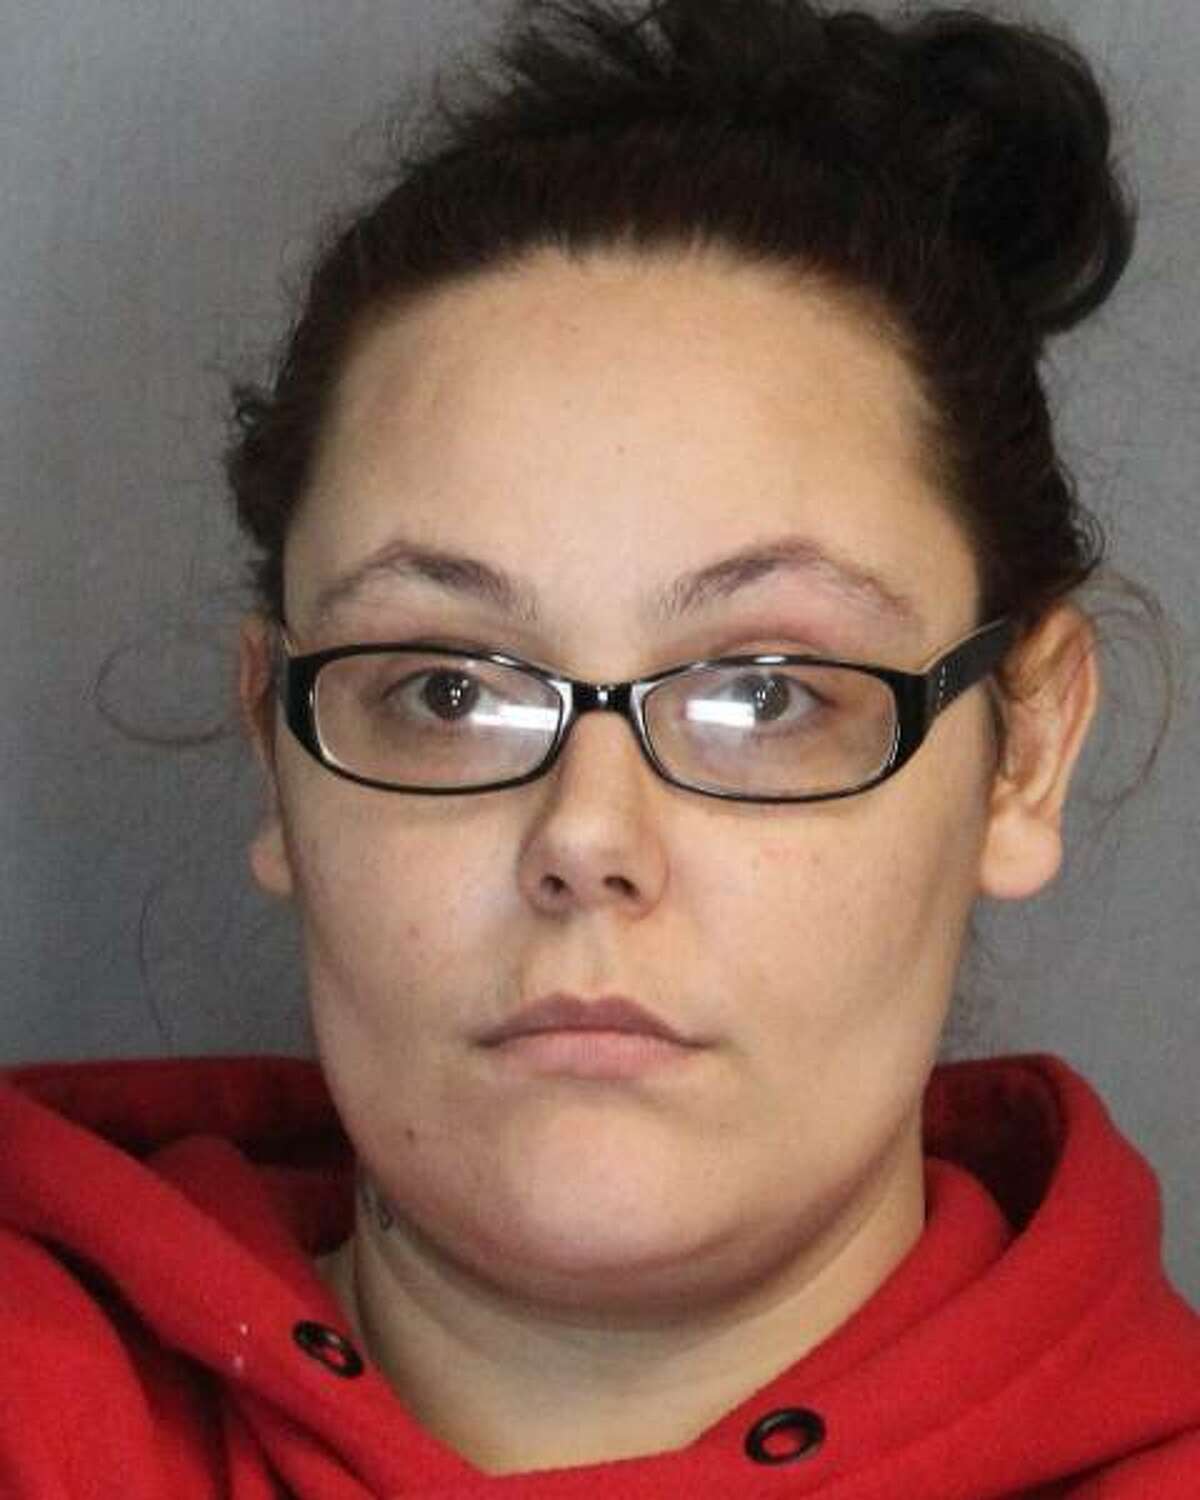 Amanda Bushley, of Utica, was arrested March 27, 2019 for attempted robbery and prostitution in connection to a January case, the Oneida District Attorney's office said.